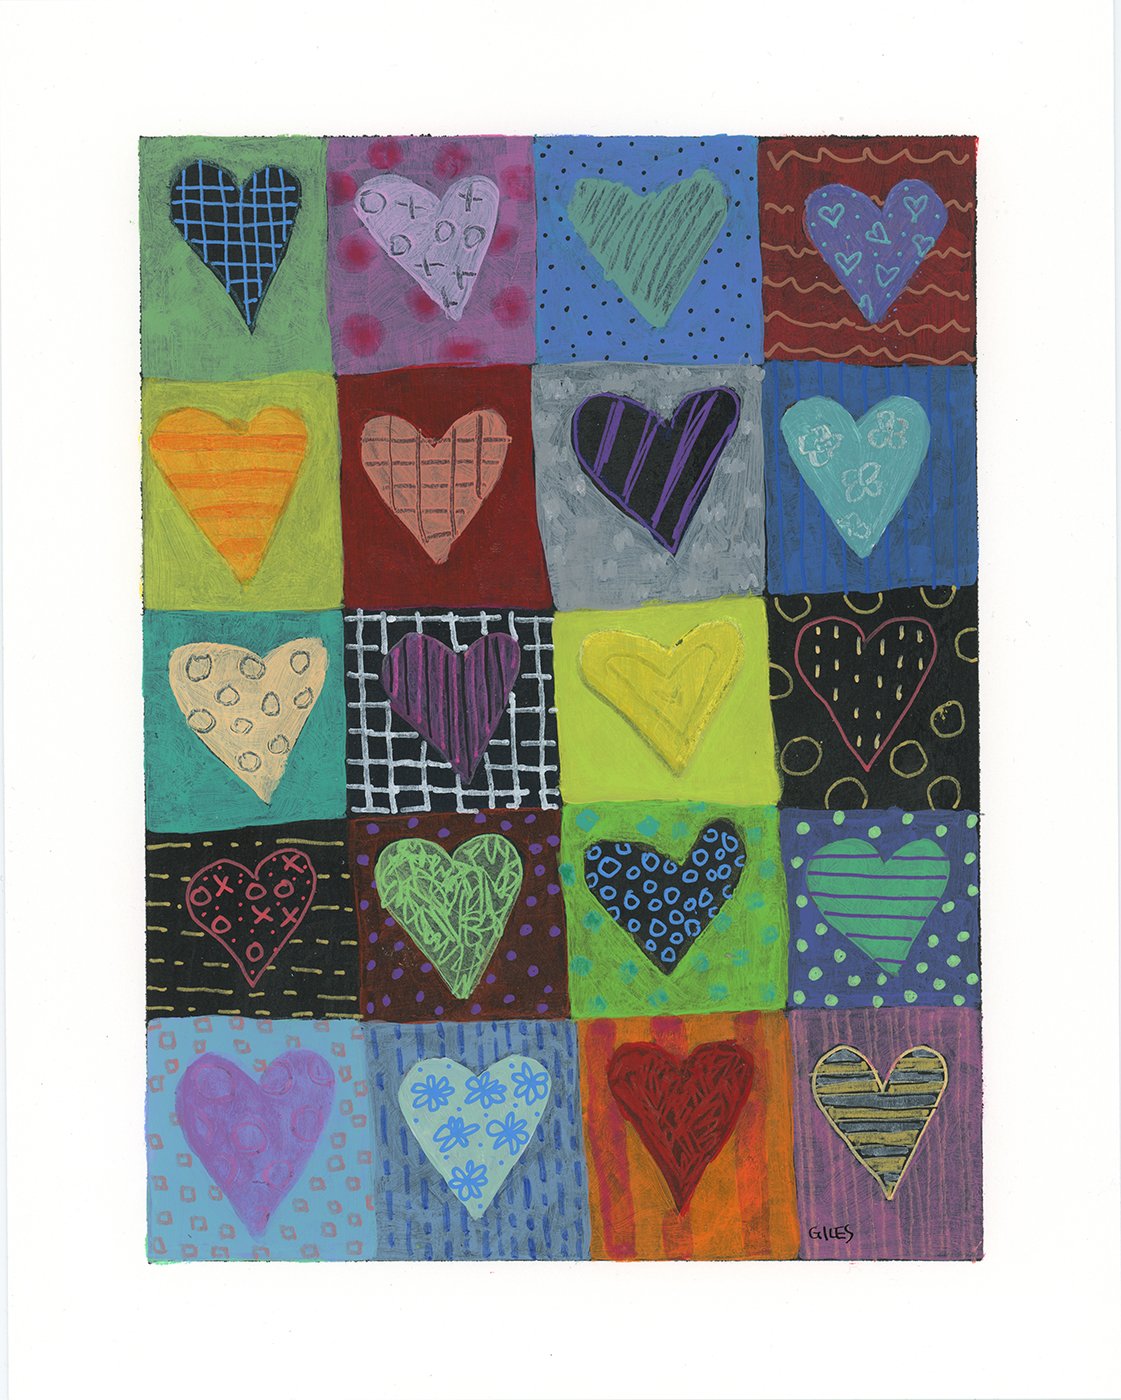 BG ART 3283 Heart Quilt No.1 Adjusted and cropped to paper.jpg